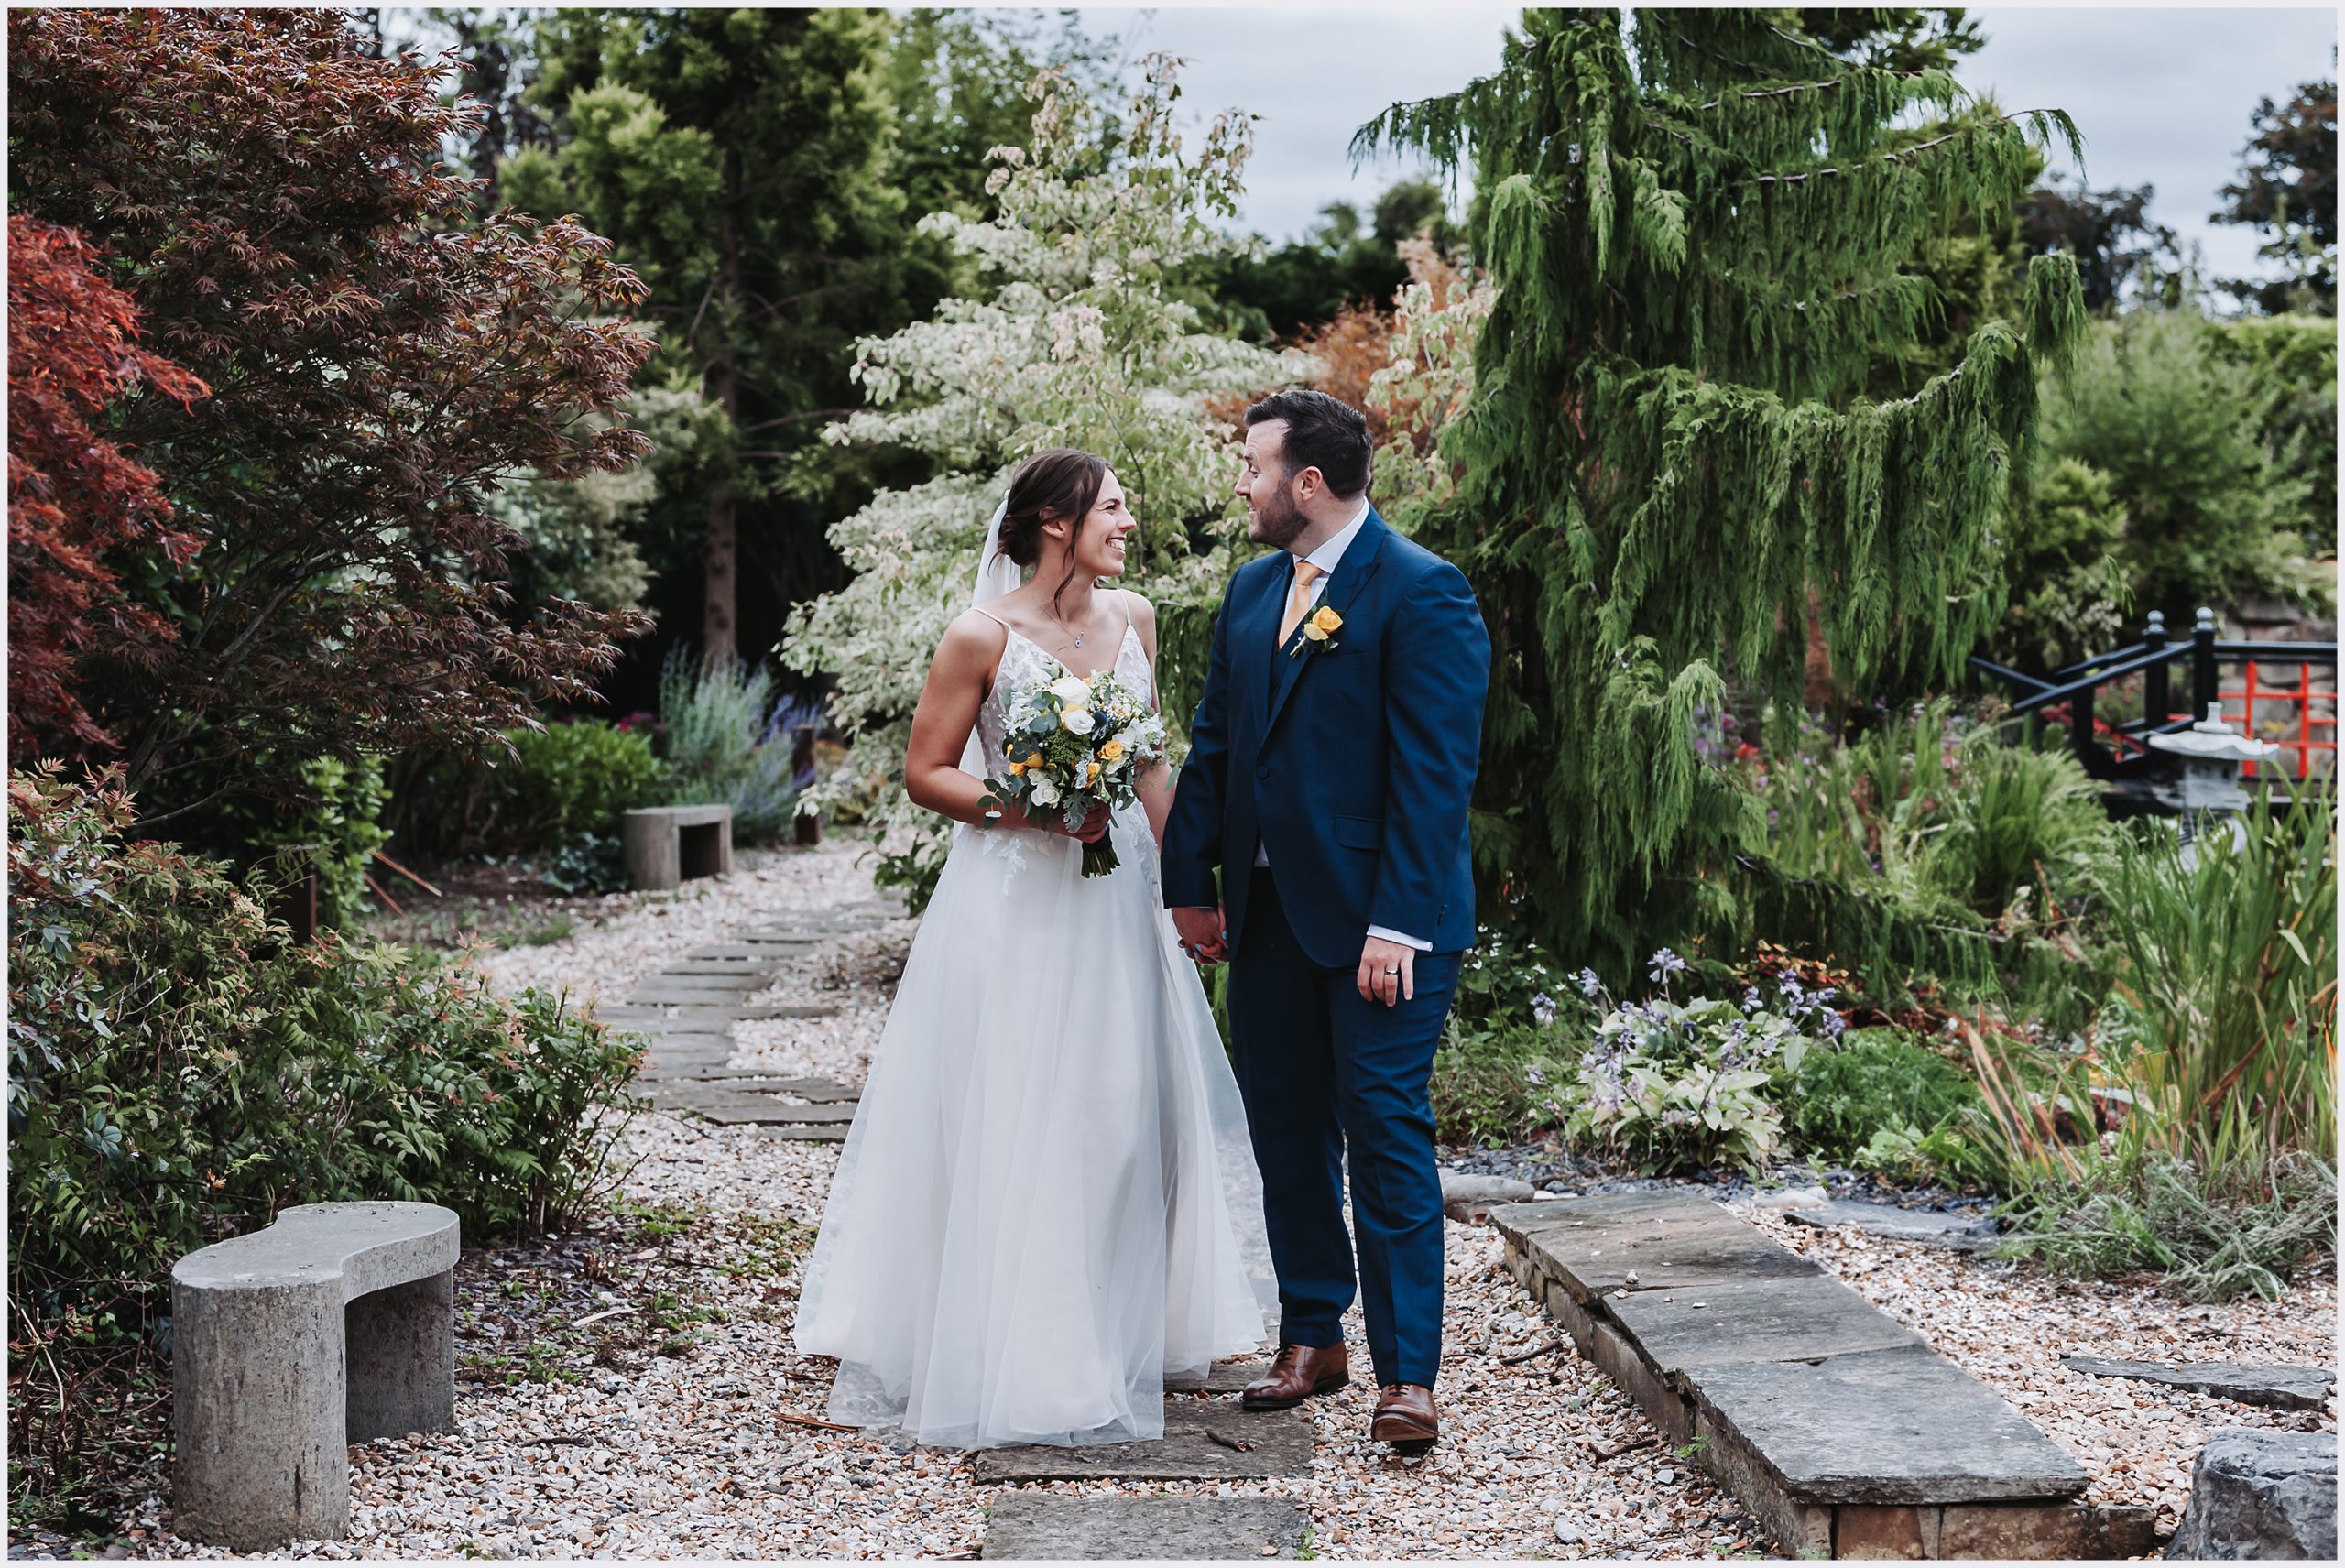 A gorgeous bride and groom smile and look into each other's eyes in the beautiful Asian gardens at The Grosvenor Pulford Hotel and Spa